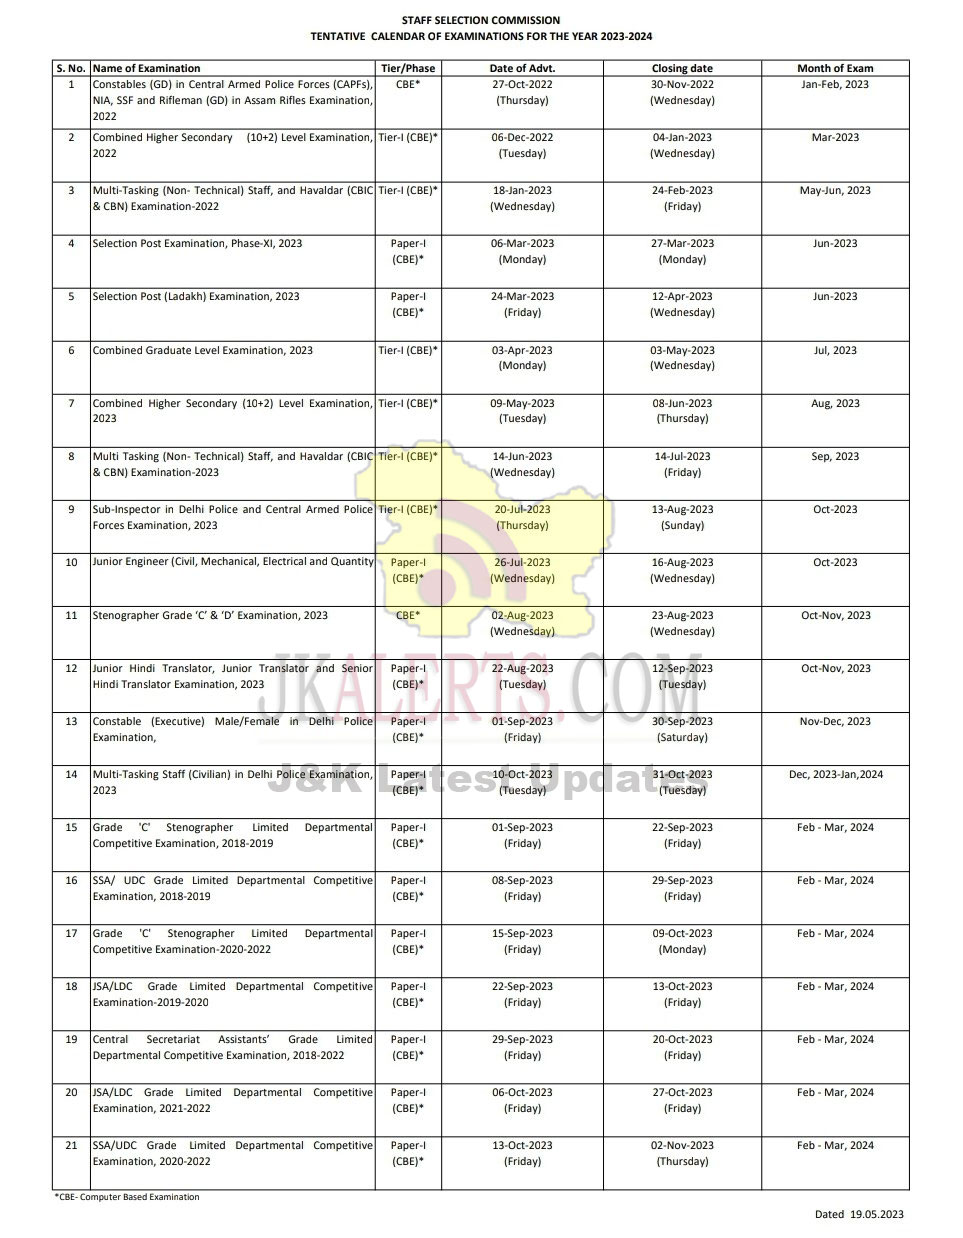 SSC Revised Calendar Of Exams For The Year 2023 2024 